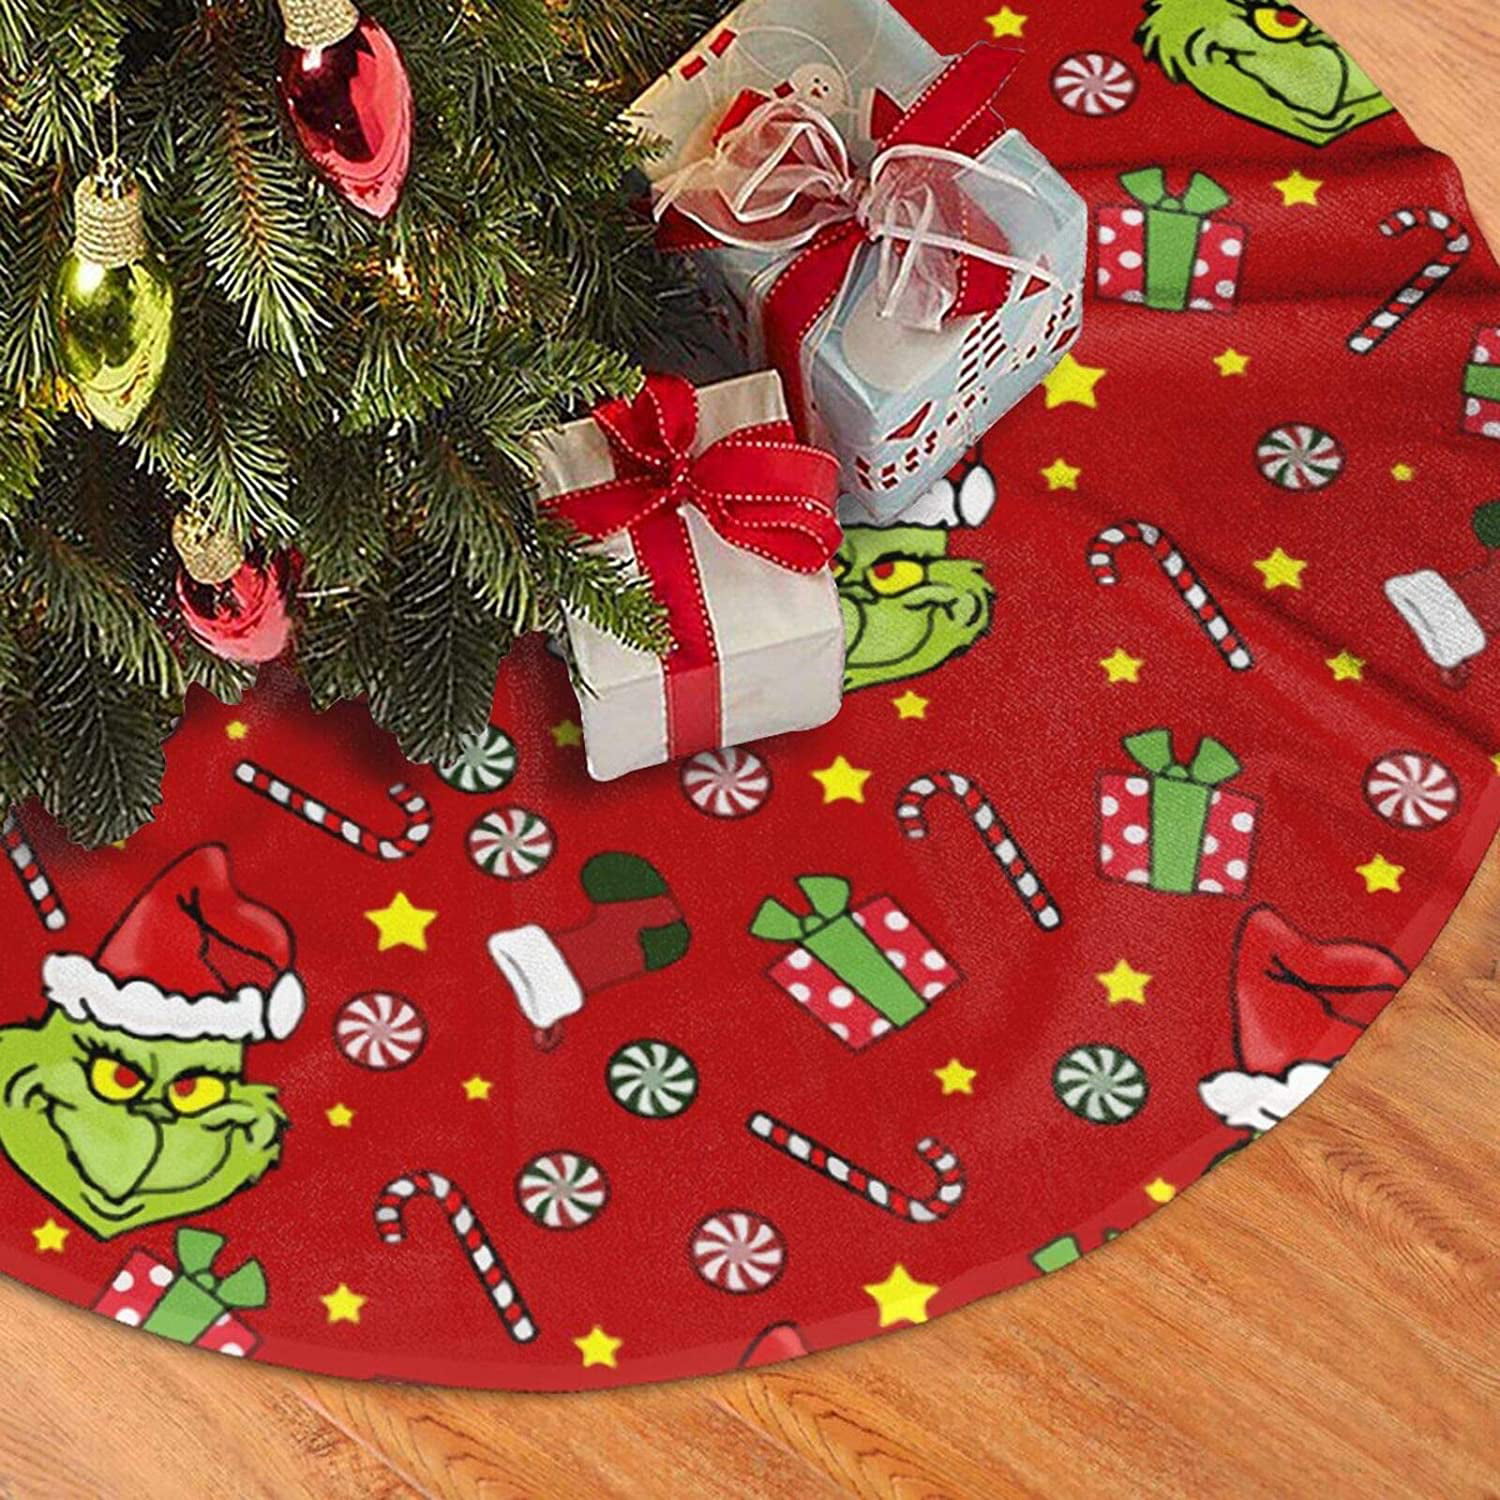 Hearth & Hand with Magnolia 324010228 Tree Skirt for sale online 